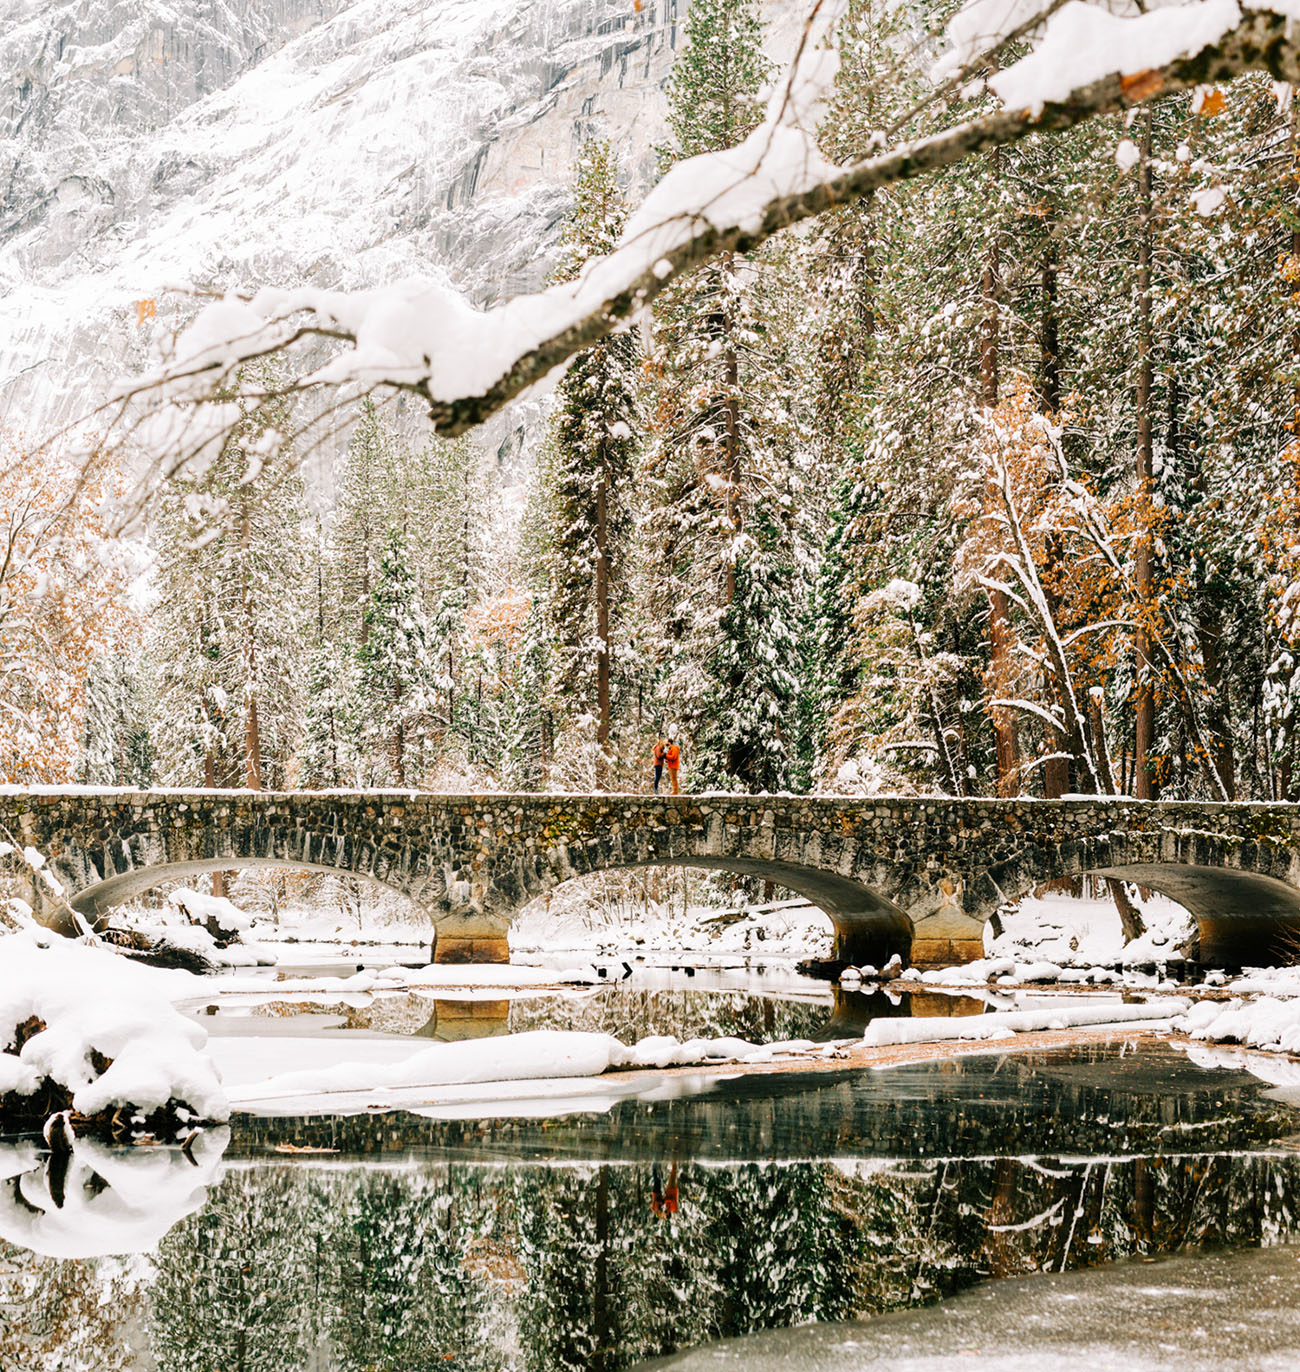 The Bride Wore Yoga Pants in this Snowy Yosemite Elopement!